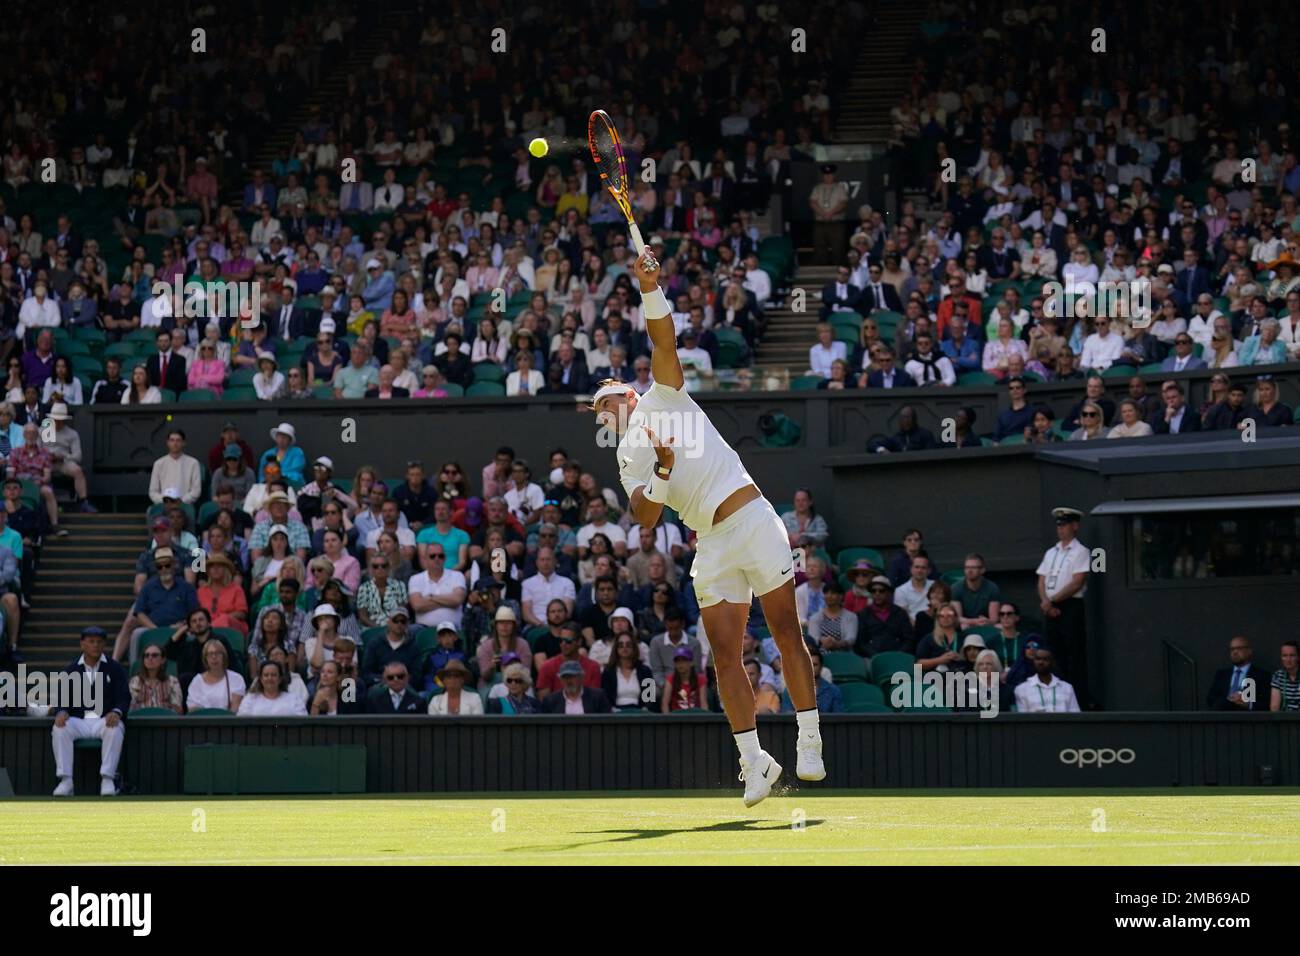 Spain's Rafael Nadal serves to Argentina's Francisco Cerundolo in a first  round men's singles match on day two of the Wimbledon tennis championships  in London, Tuesday, June 28, 2022. (AP Photo/Alberto Pezzali